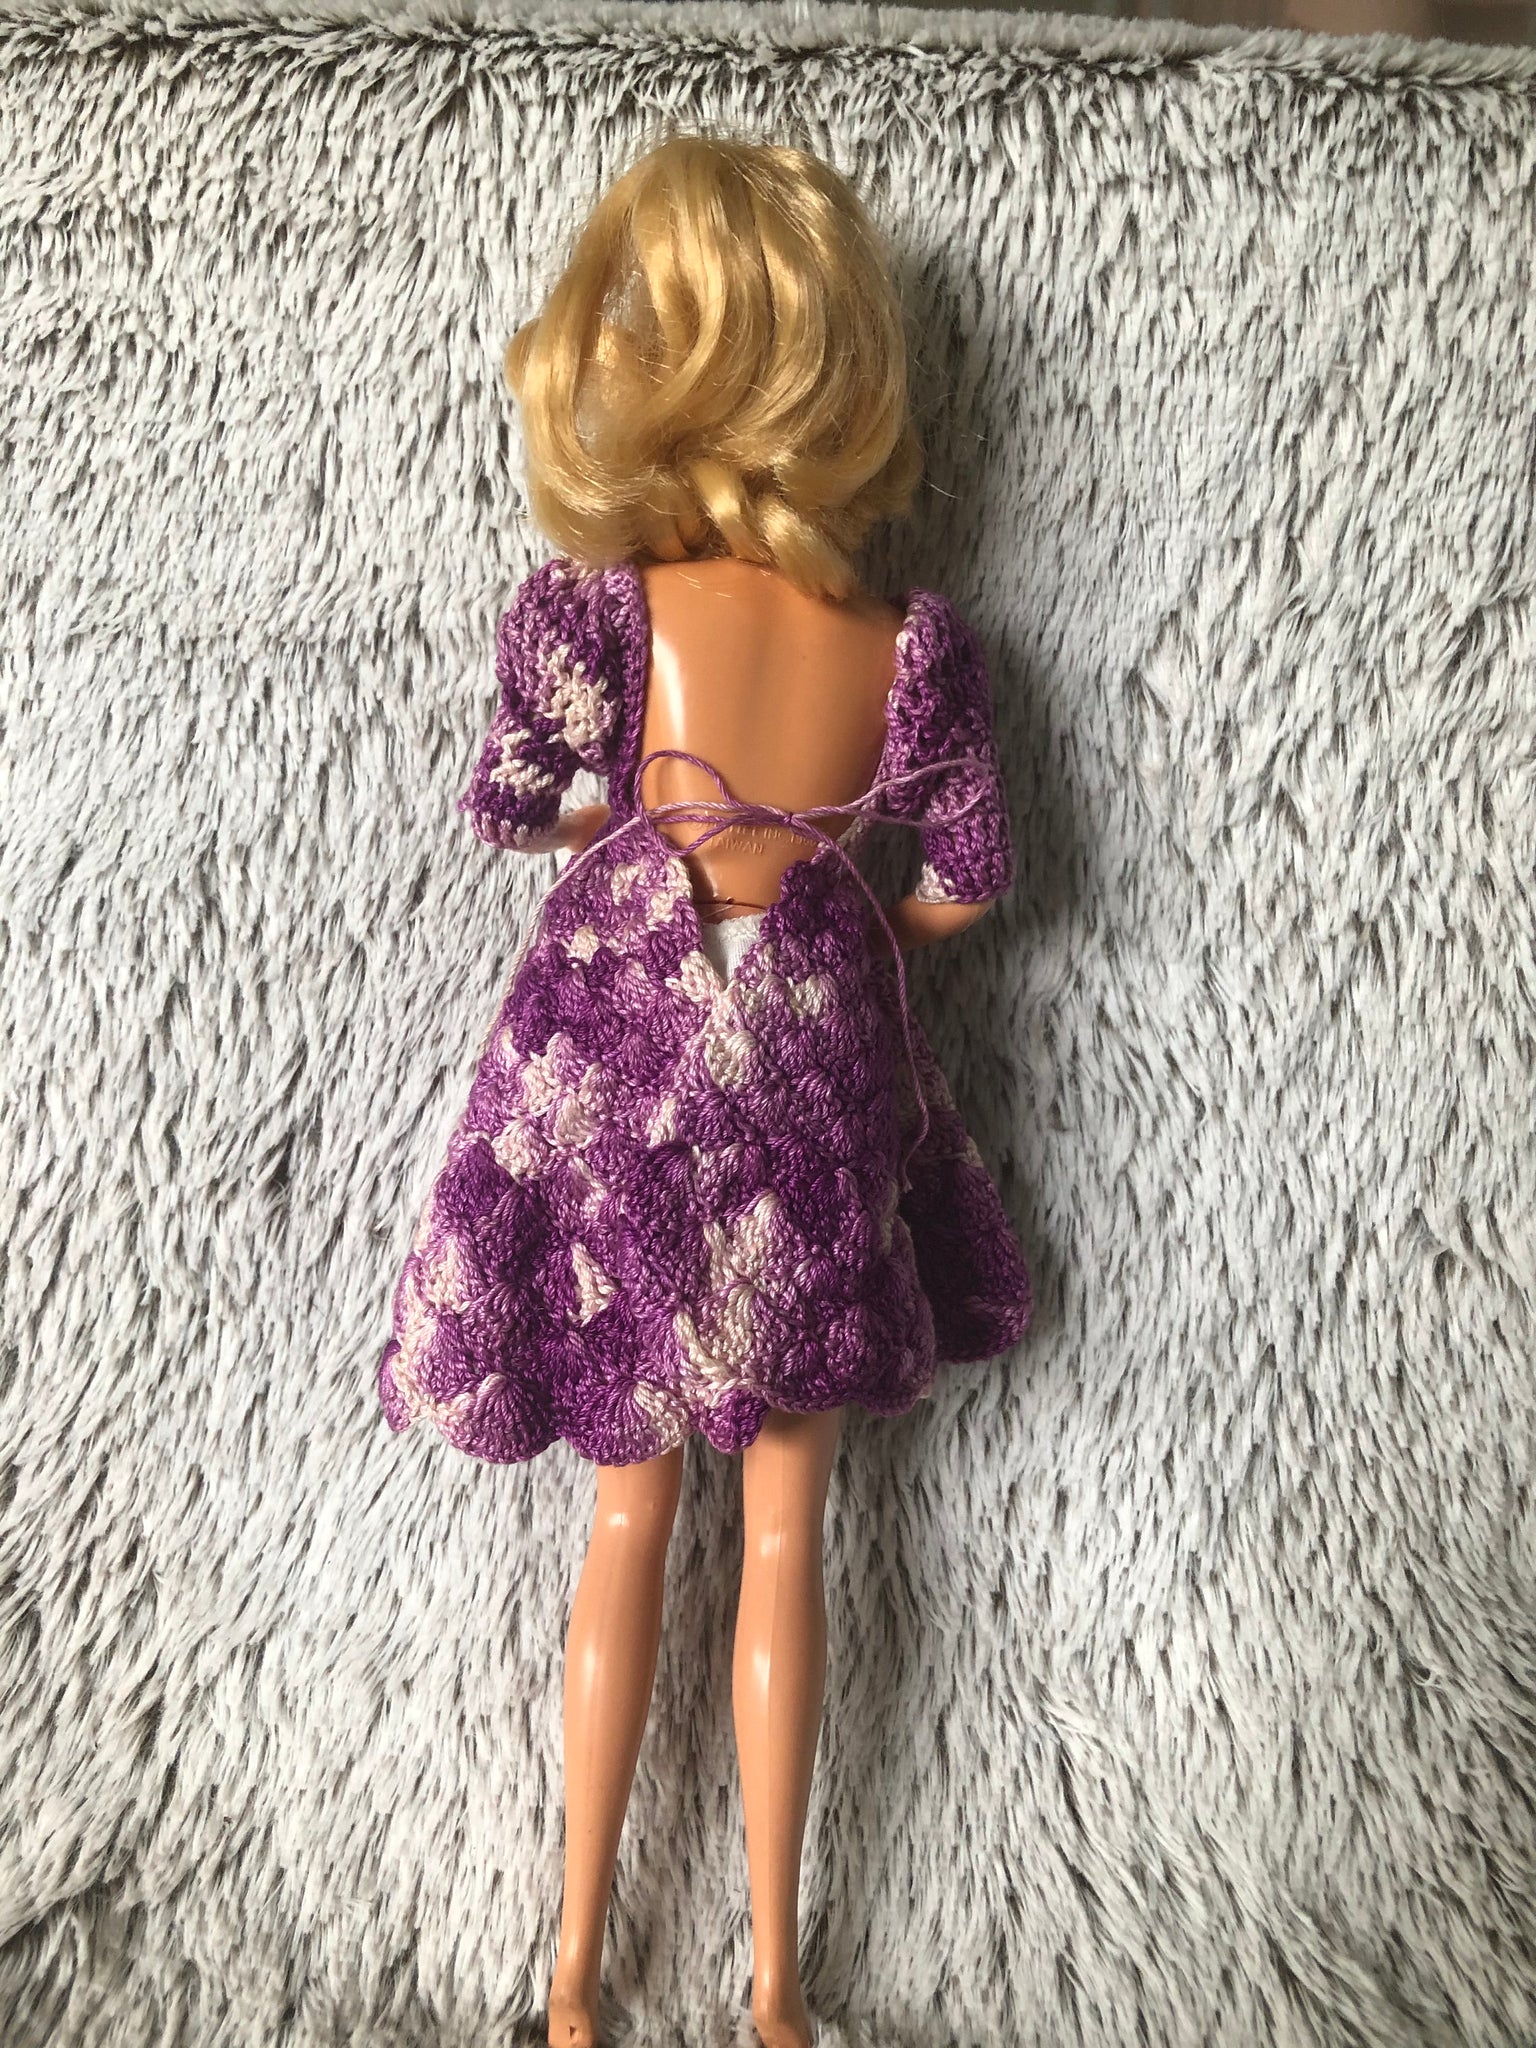 1960s Vintage Mattel Barbie Blue Eyes Blond Hair TNT style, with Hand  Crochet Purple Dress, made in Taiwan, Great Condition